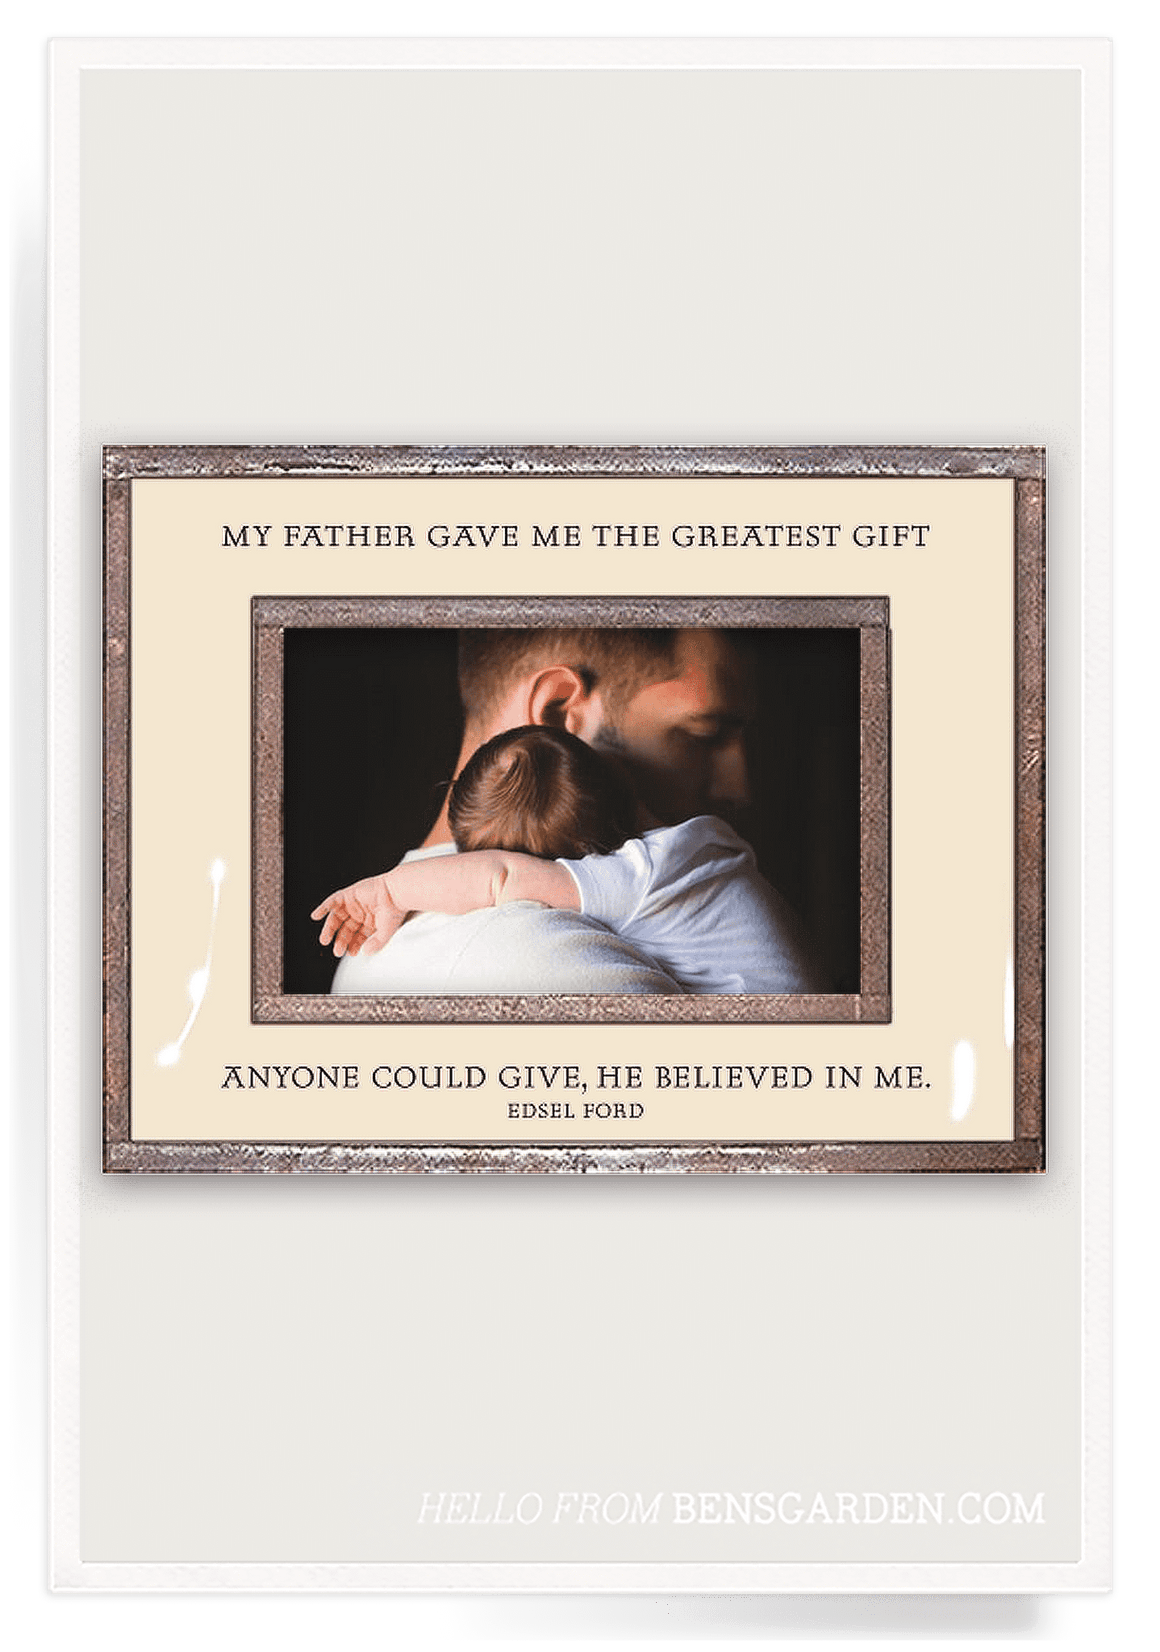 The Greatest Gift My Father Copper & Glass Photo Frame - Bensgarden.com